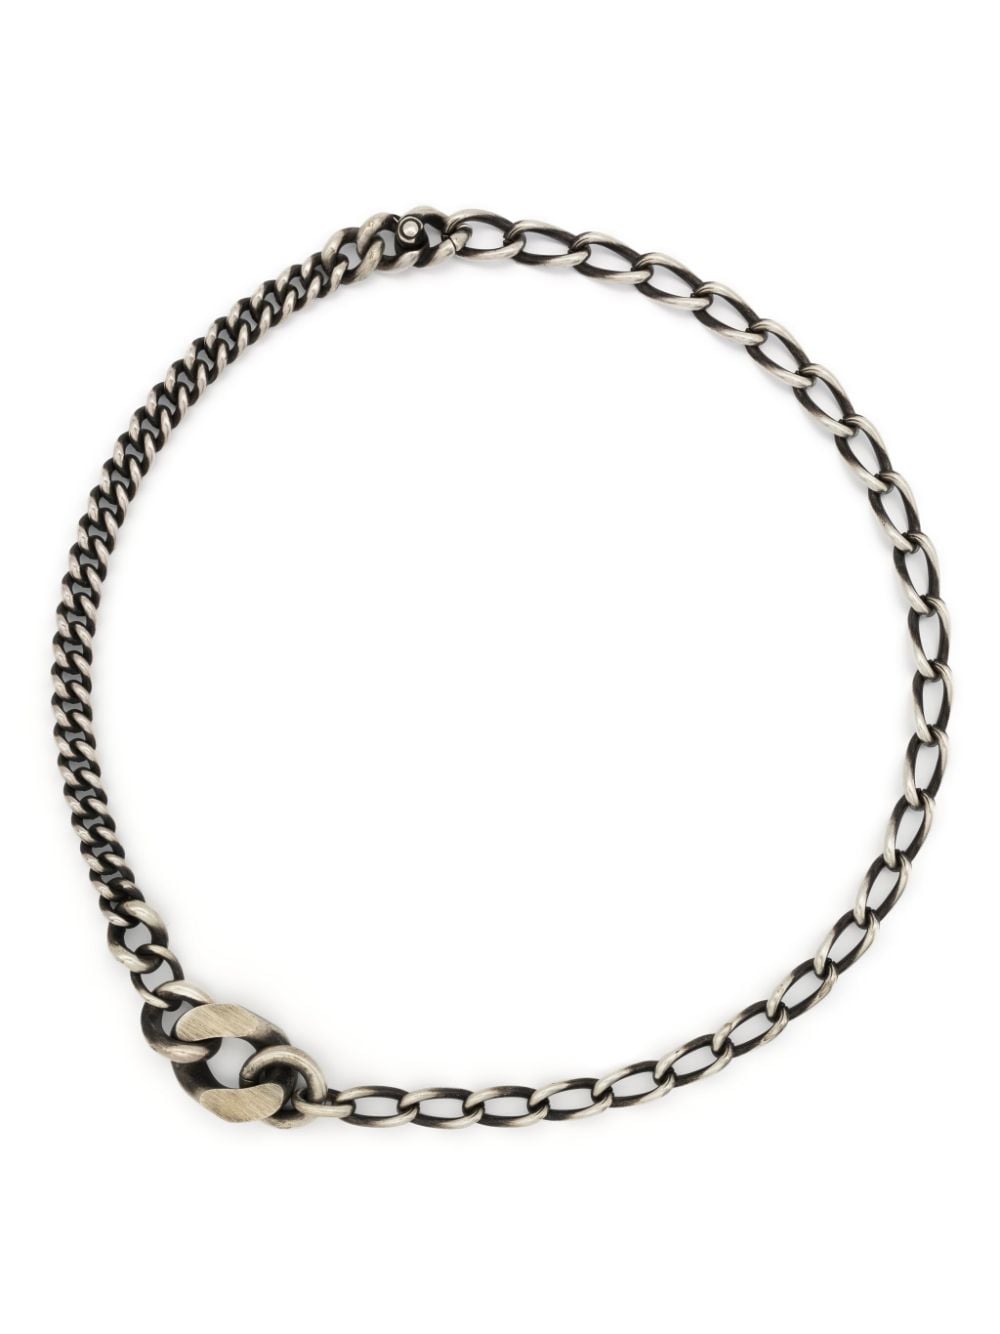 chain-link necklace